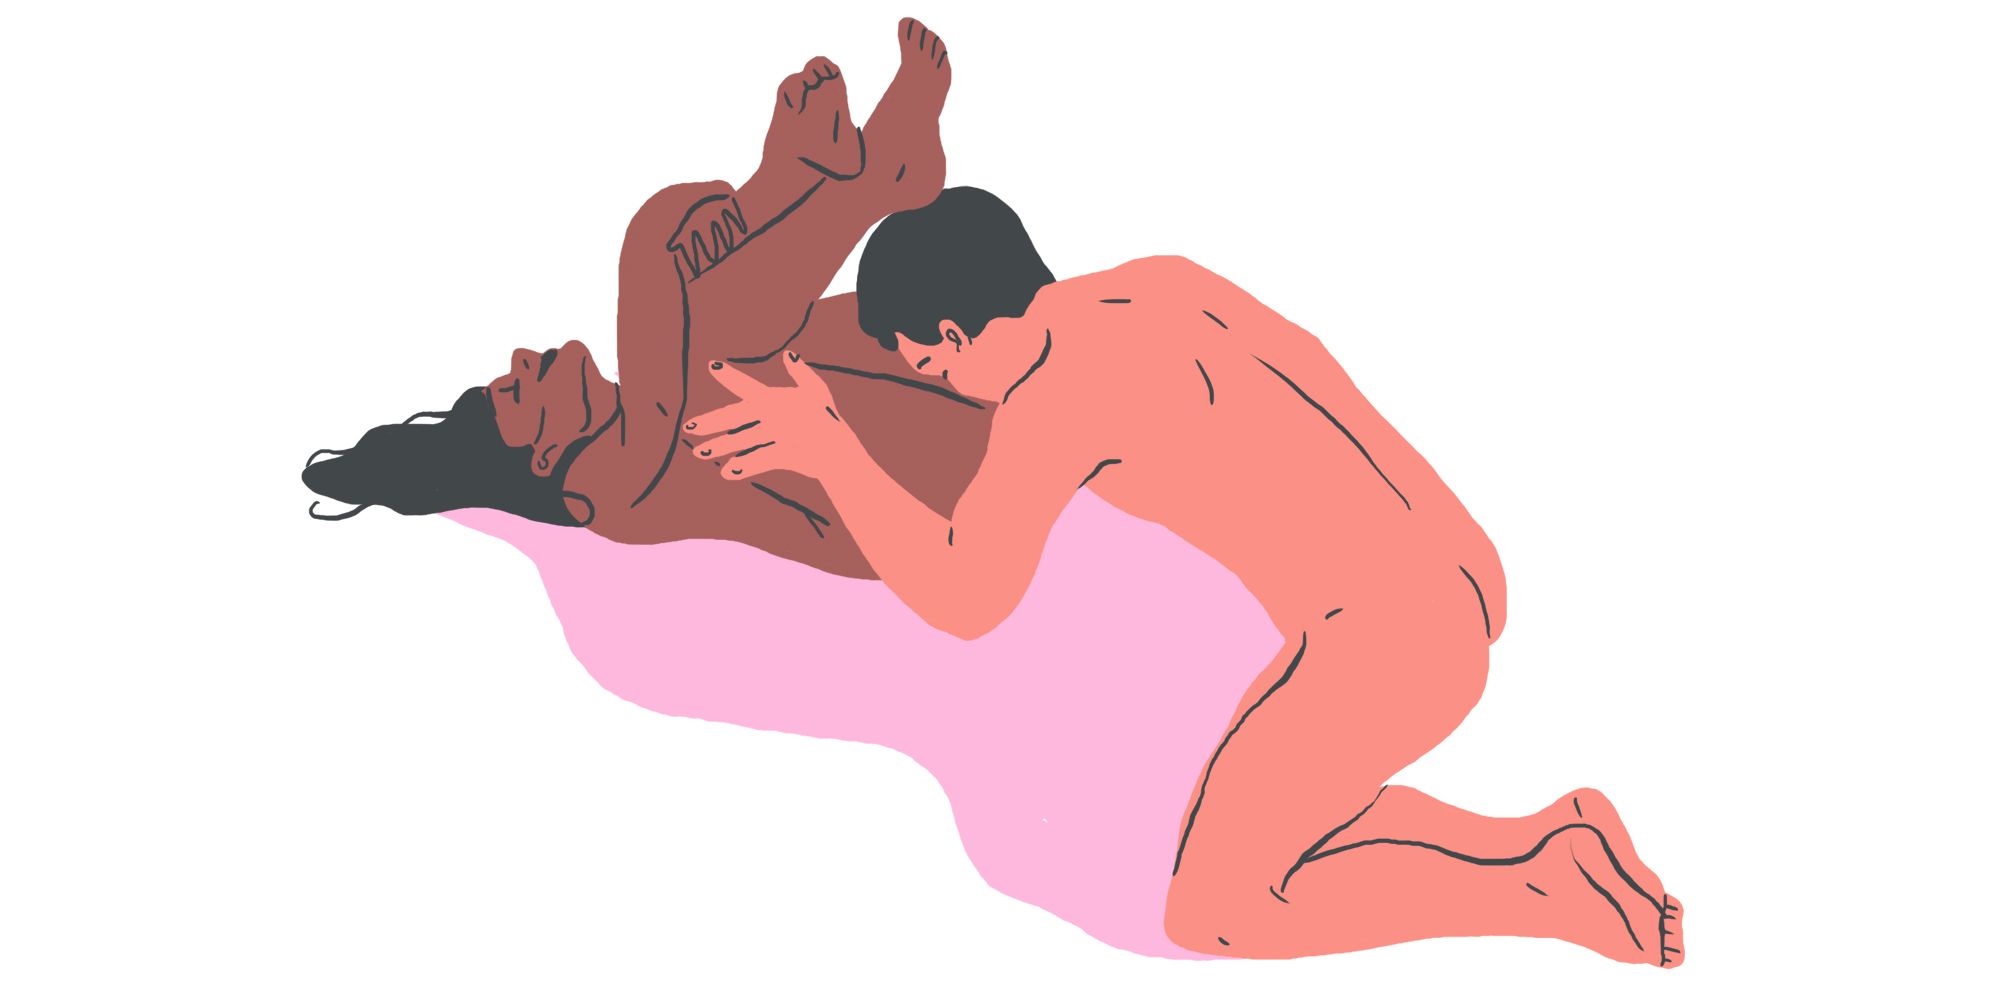 Slideshow: sex positions to eat pussy.